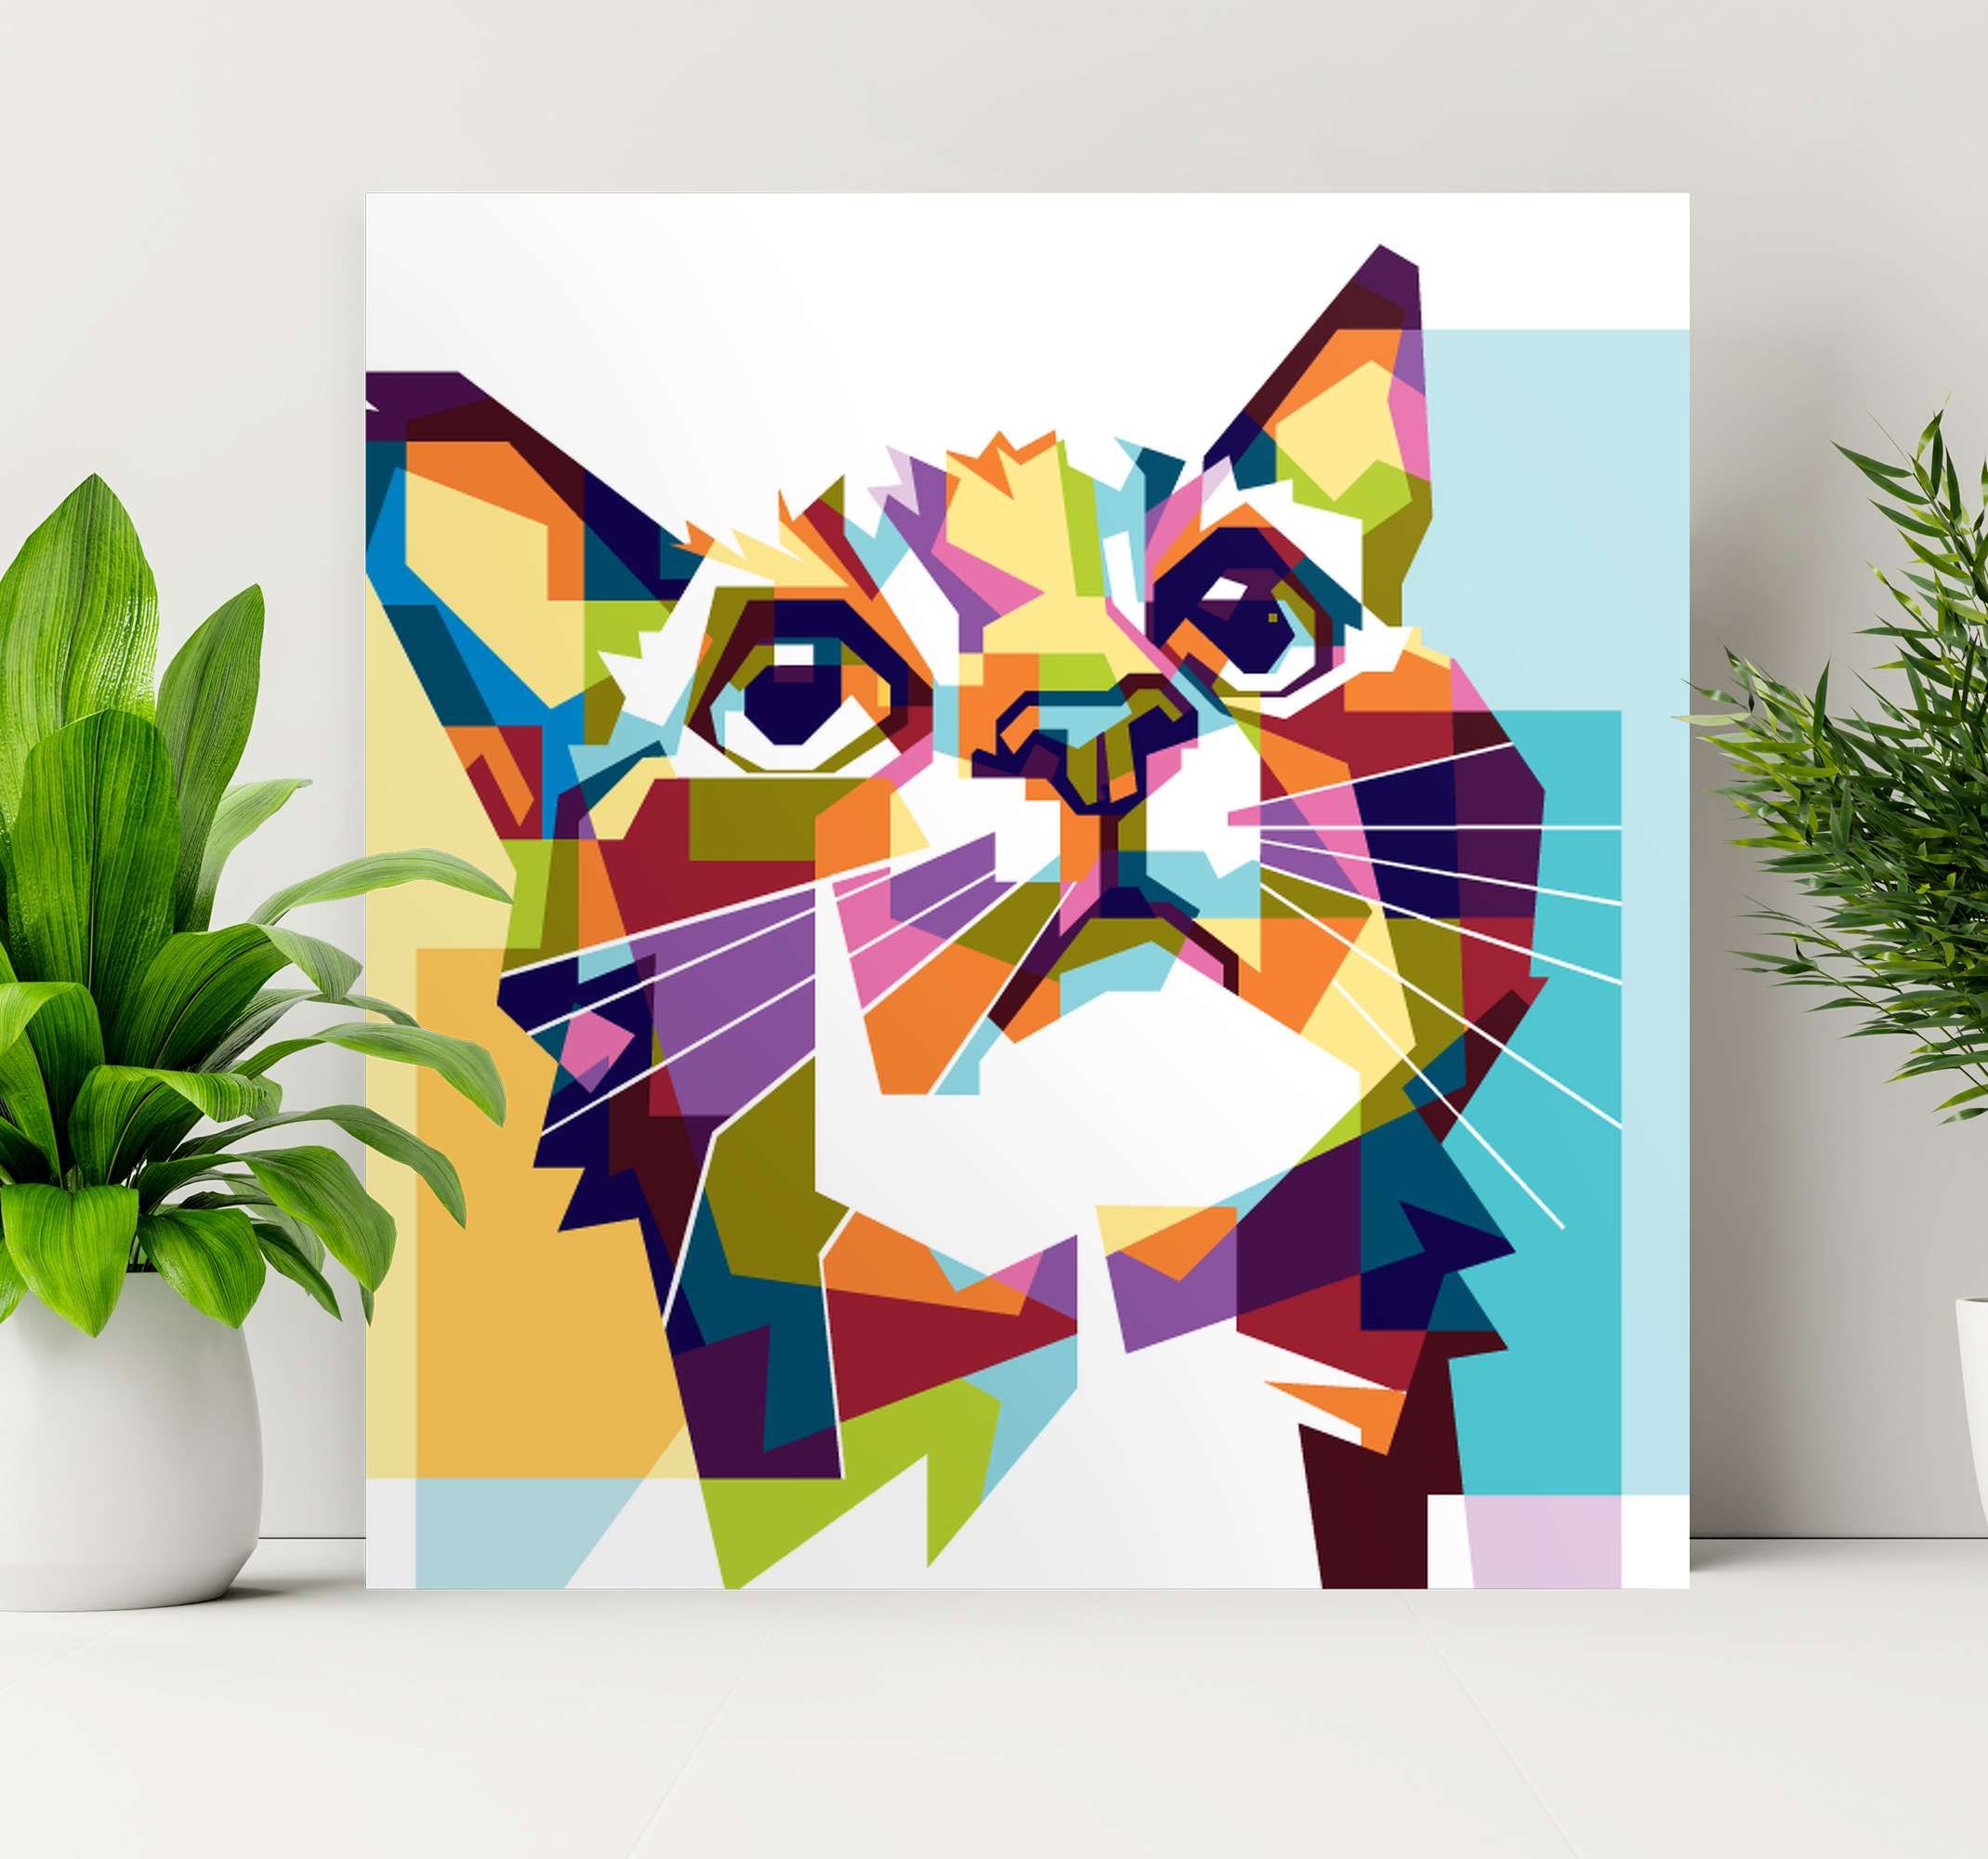 Geometric Cat Wall Art Canvas – Tenstickers In Best And Newest Cats Wall Art (View 13 of 20)